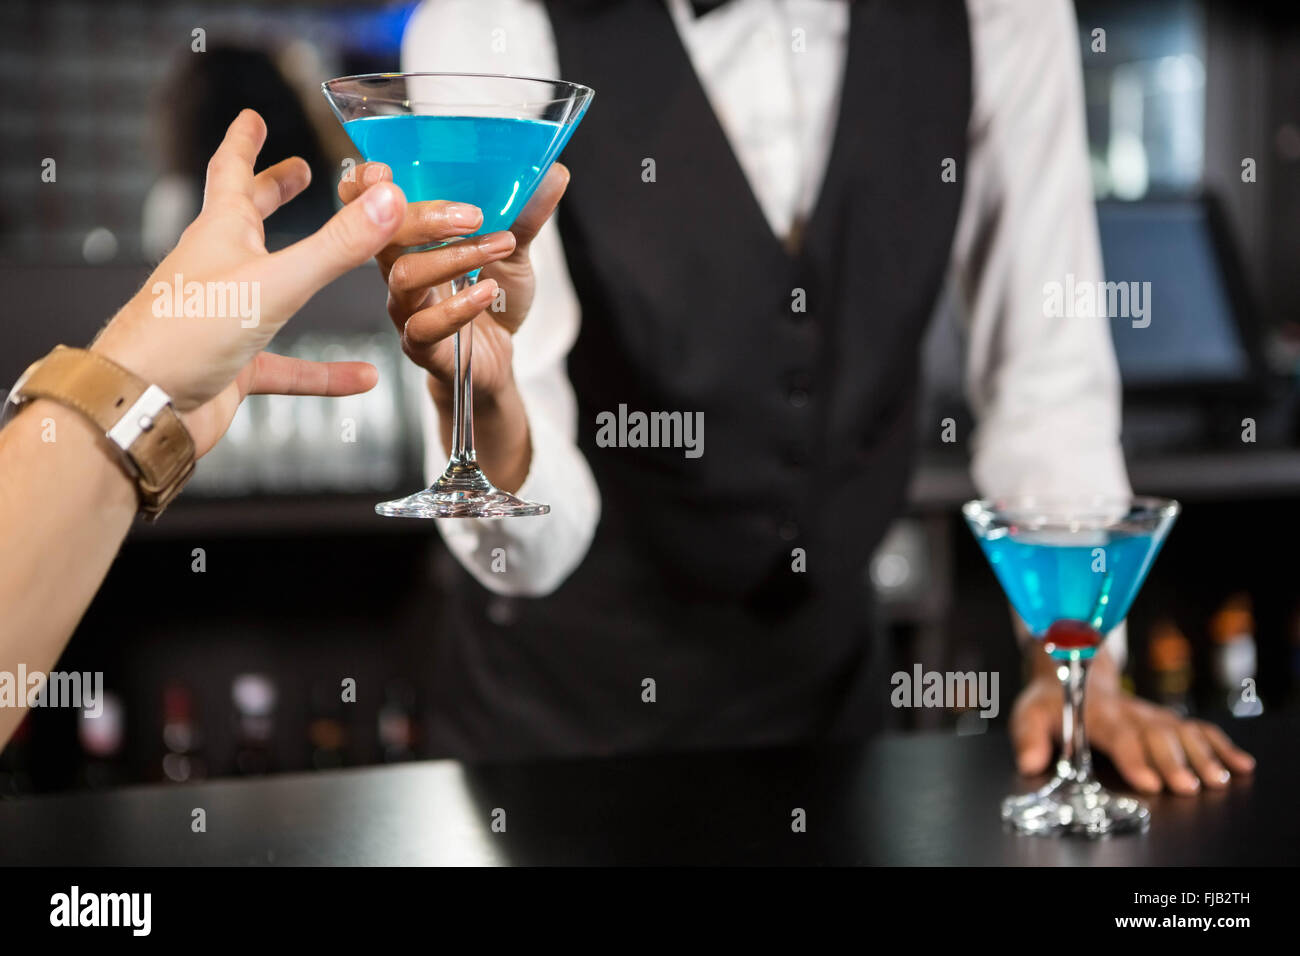 Bartender serving blue cocktail at bar counter Stock Photo